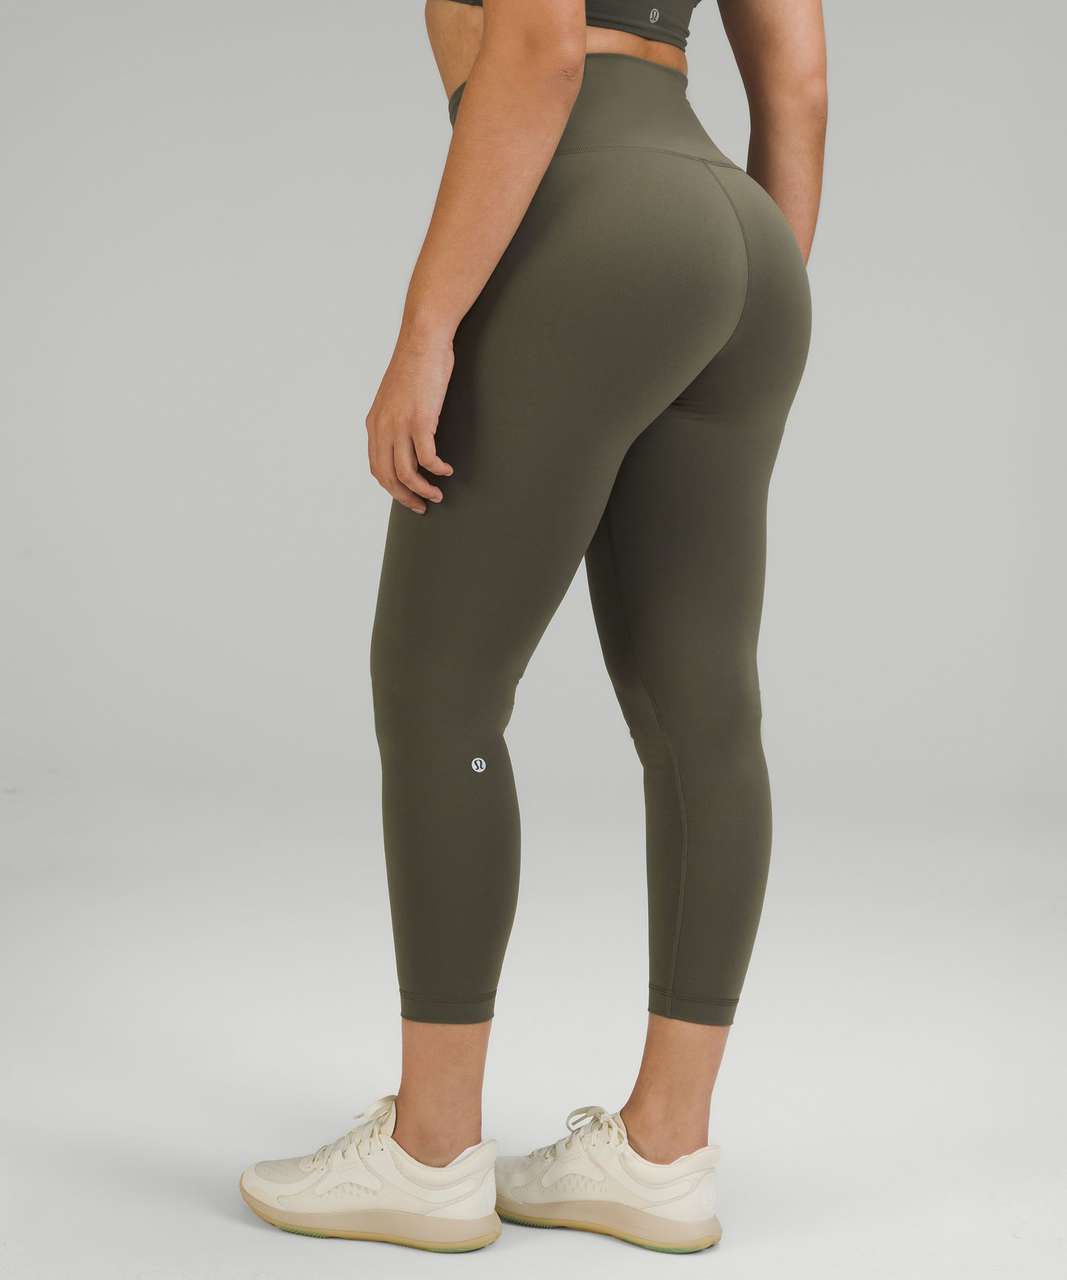 Lululemon Wunder Train Contour Fit High-Rise Tight 28 - Army